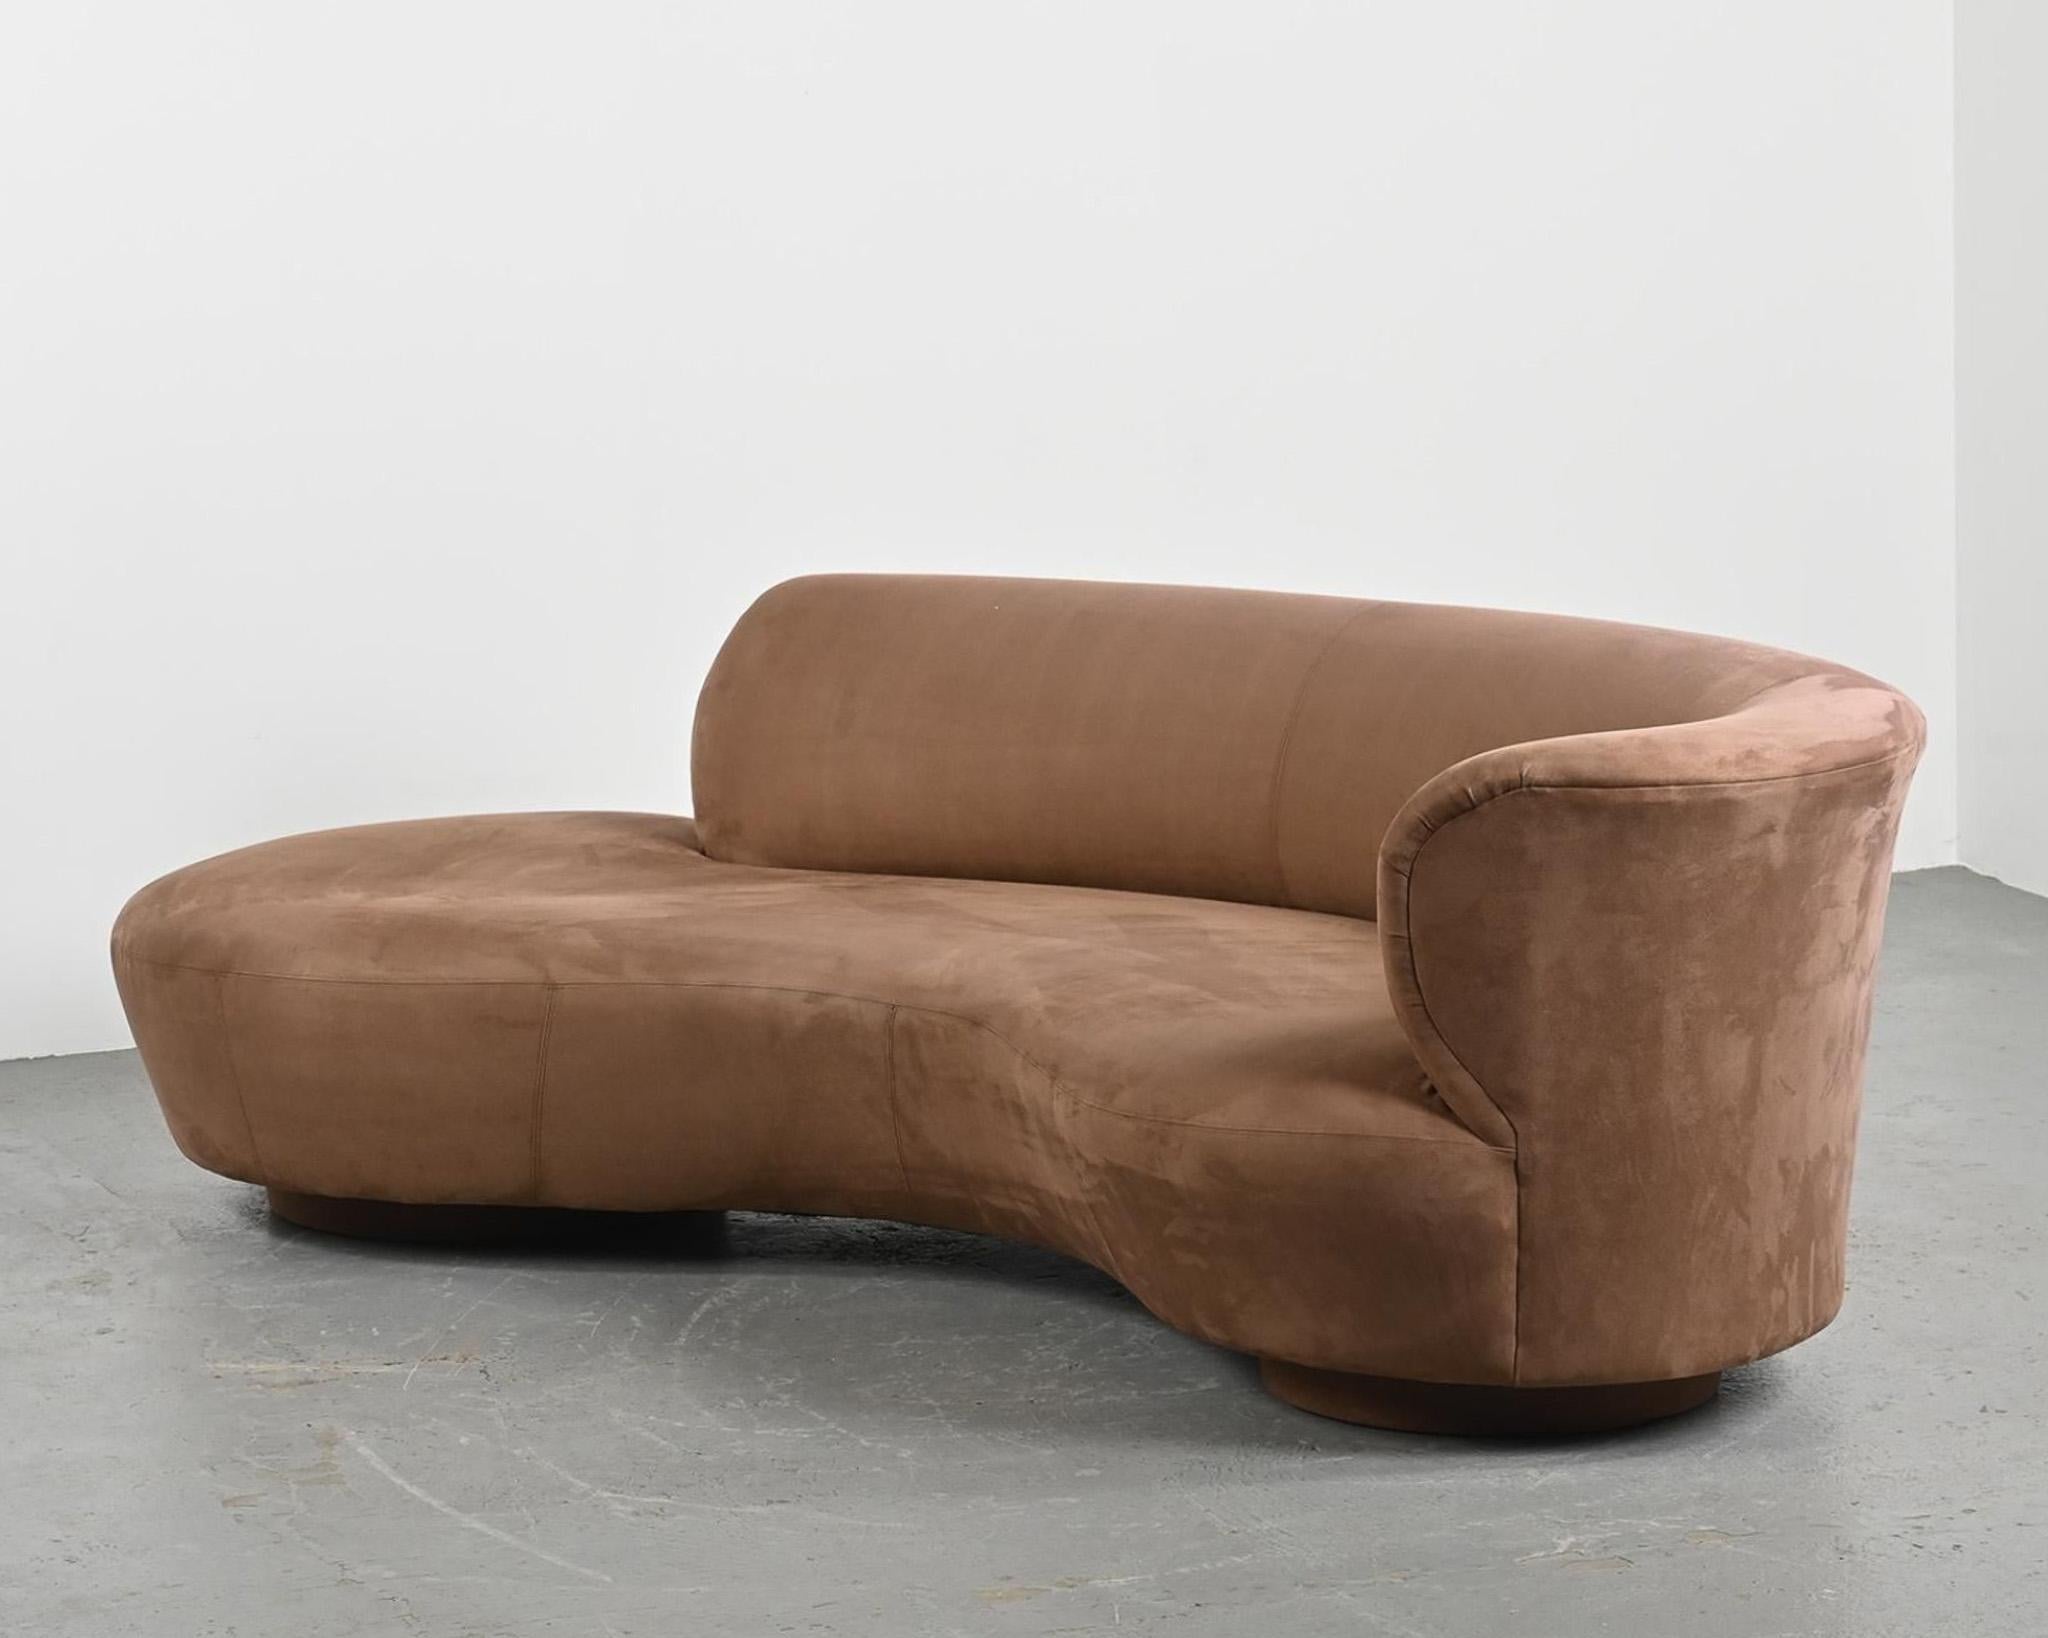 Late 20th Century Vladimir Kagan Curved Free Form Styled Sofa in Suede Upholstery, 1990s For Sale